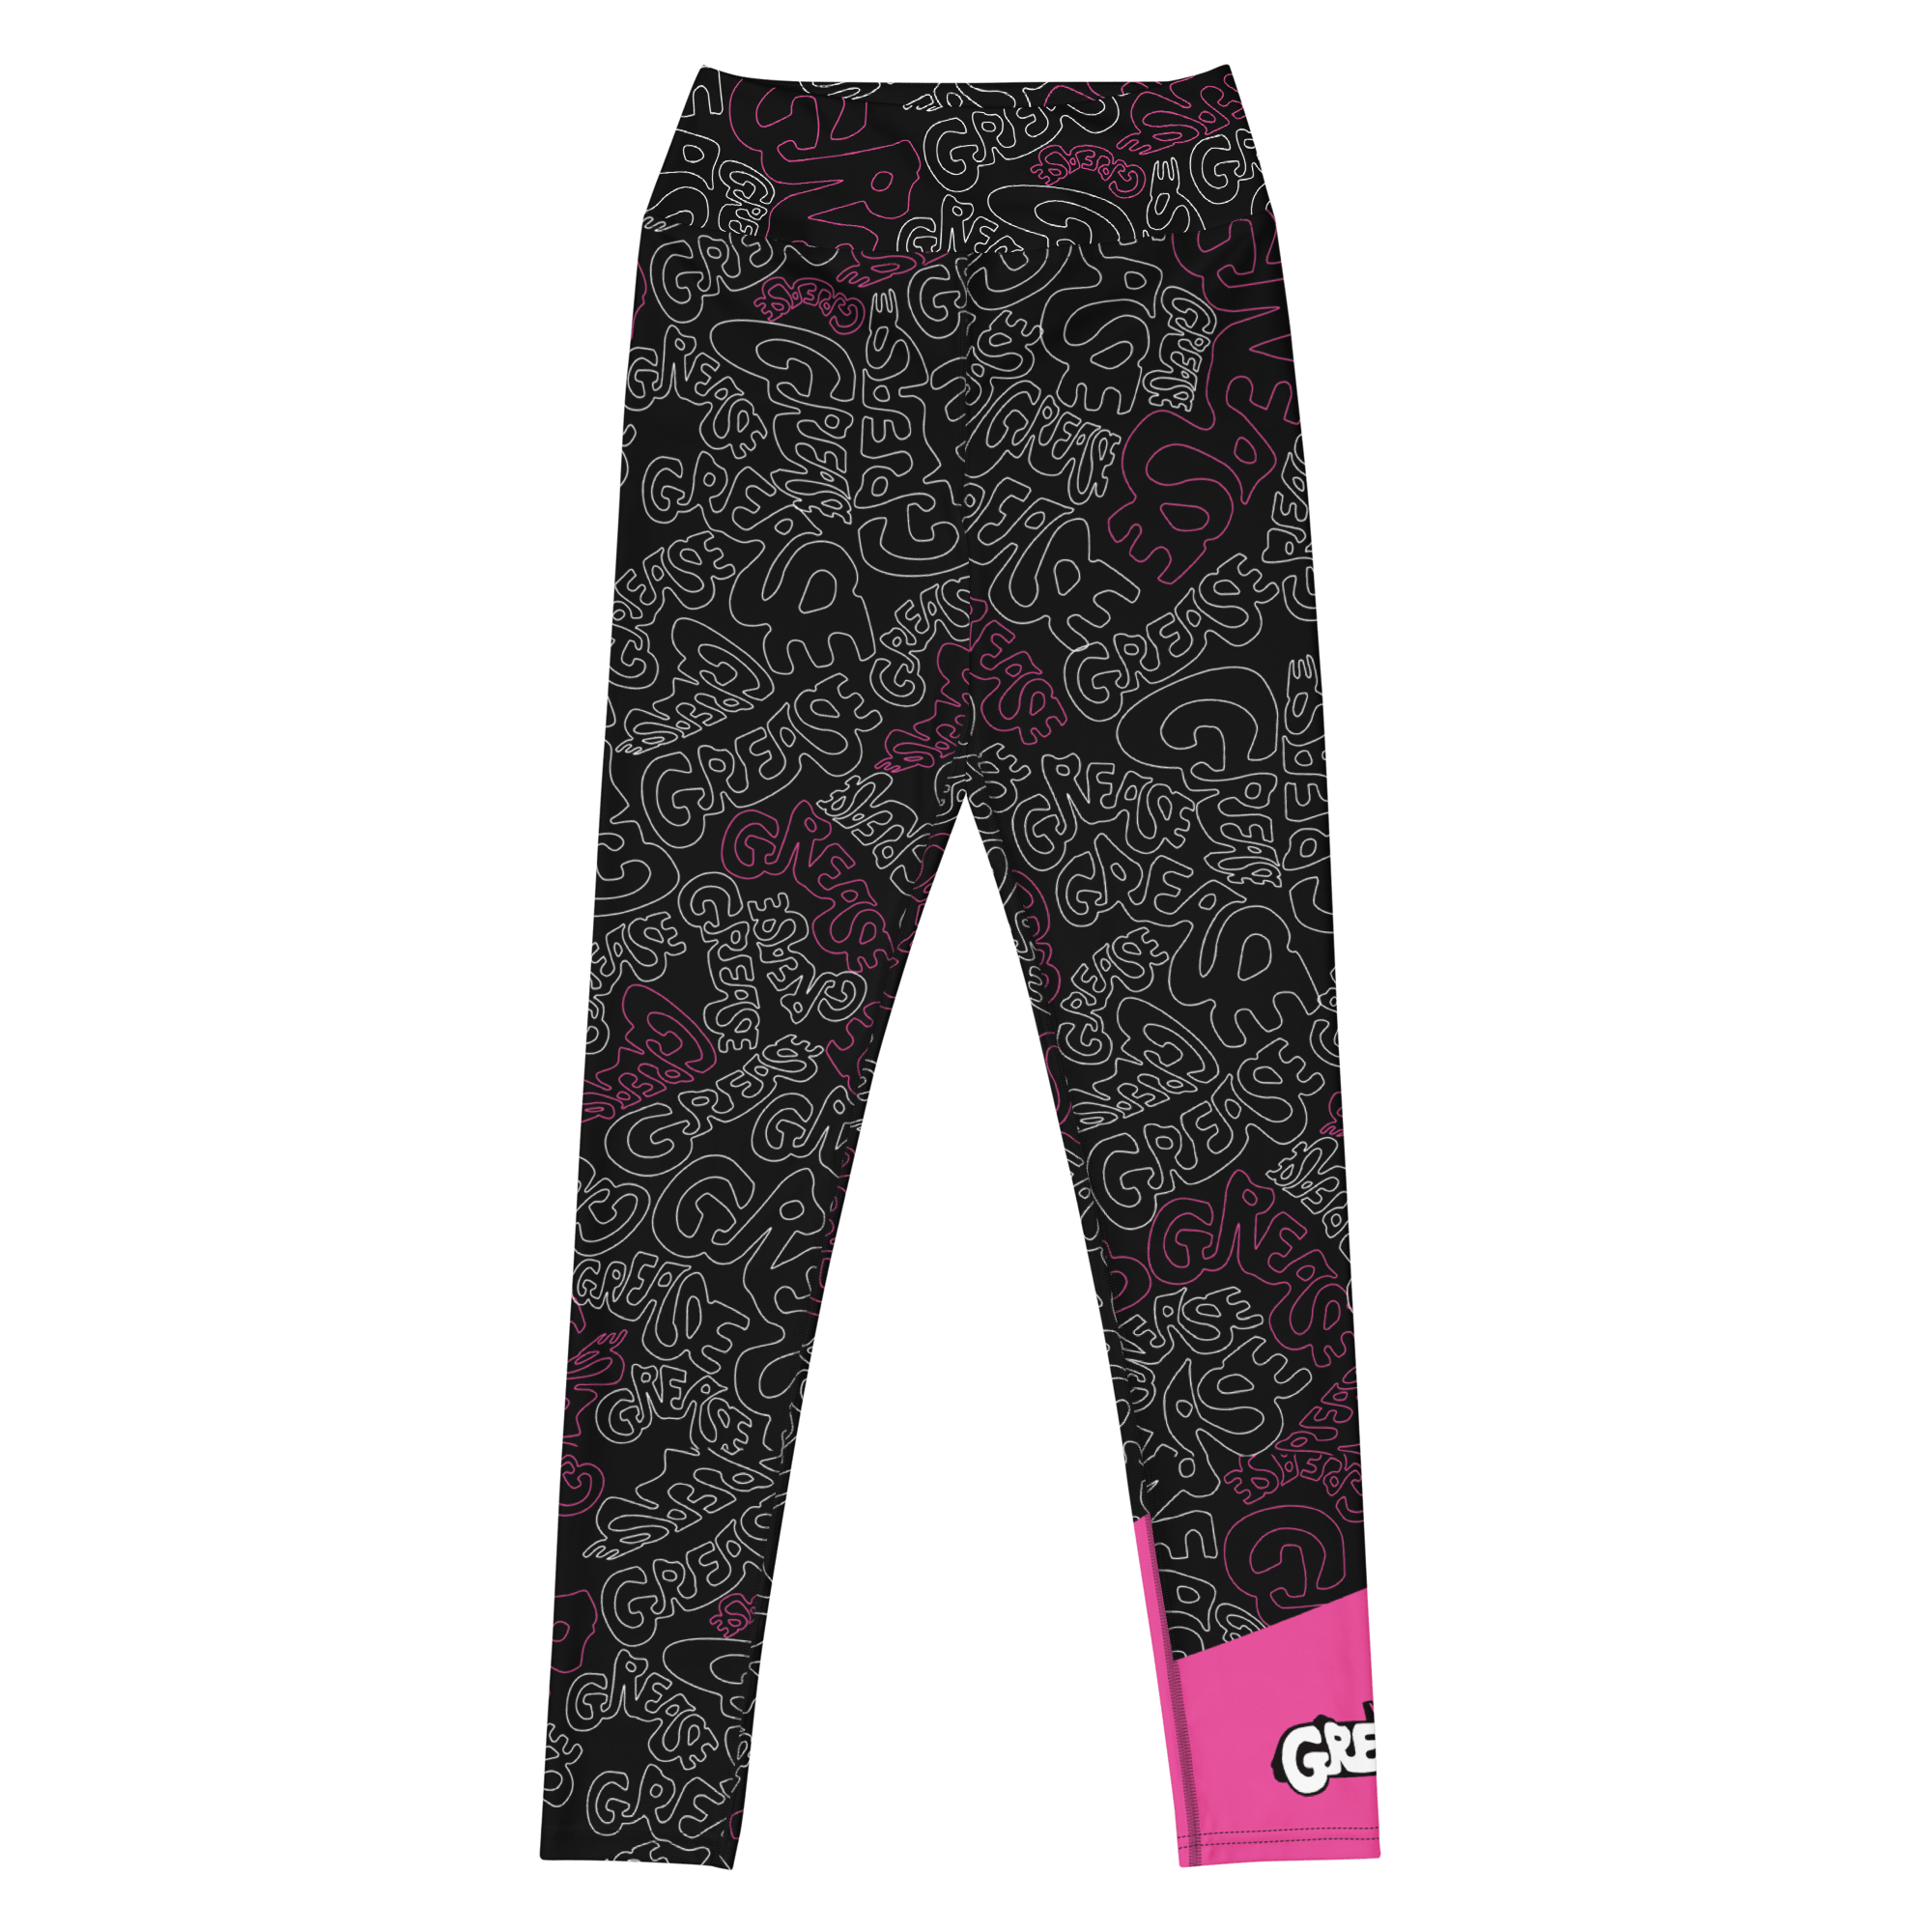 Grease Pattern High-Waisted Leggings